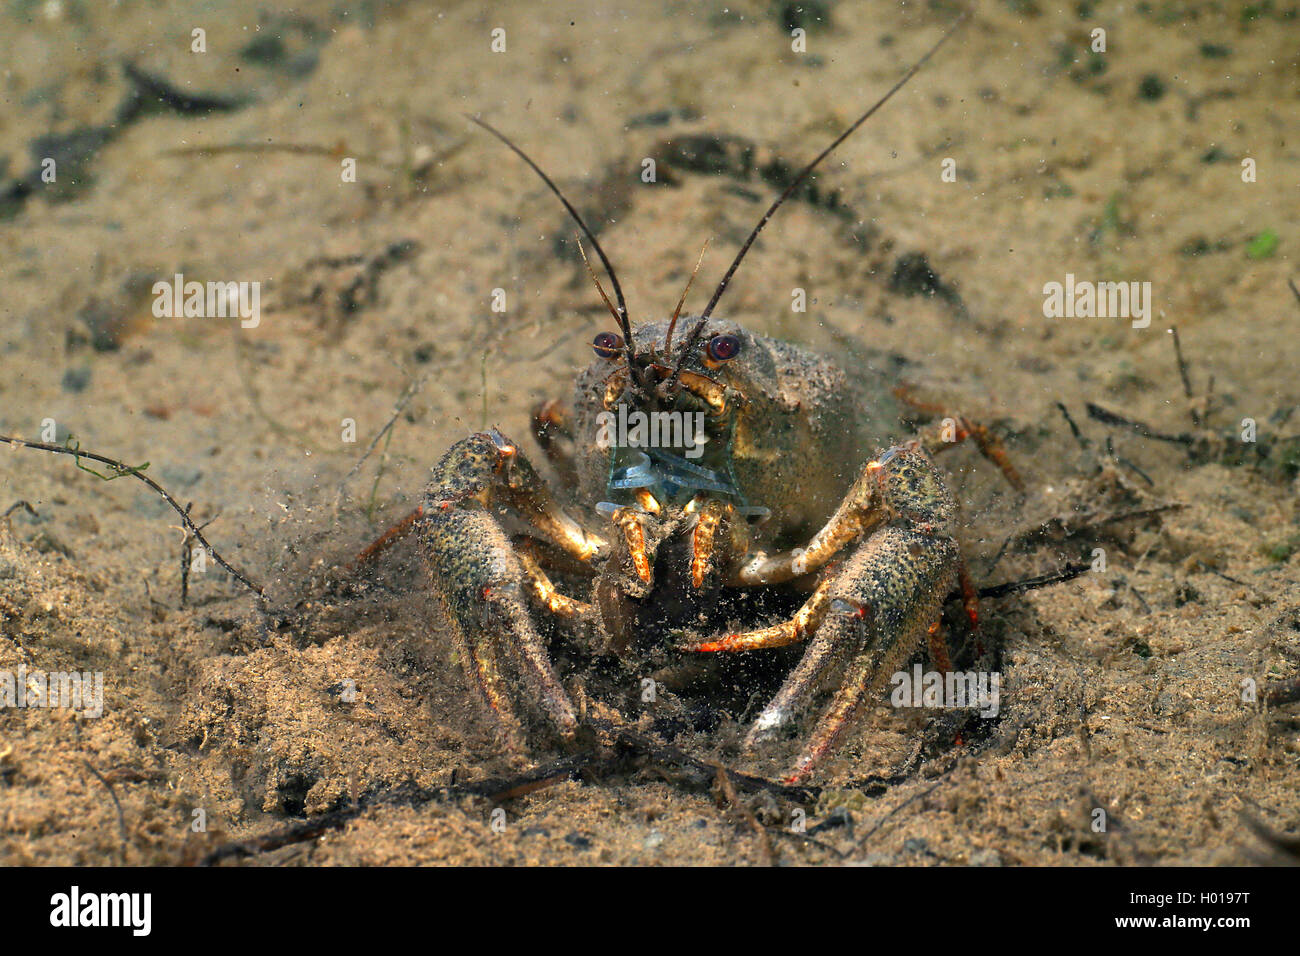 long-clawed crayfish (Astacus leptodactylus), at the bottom, Romania, Danube Delta Stock Photo